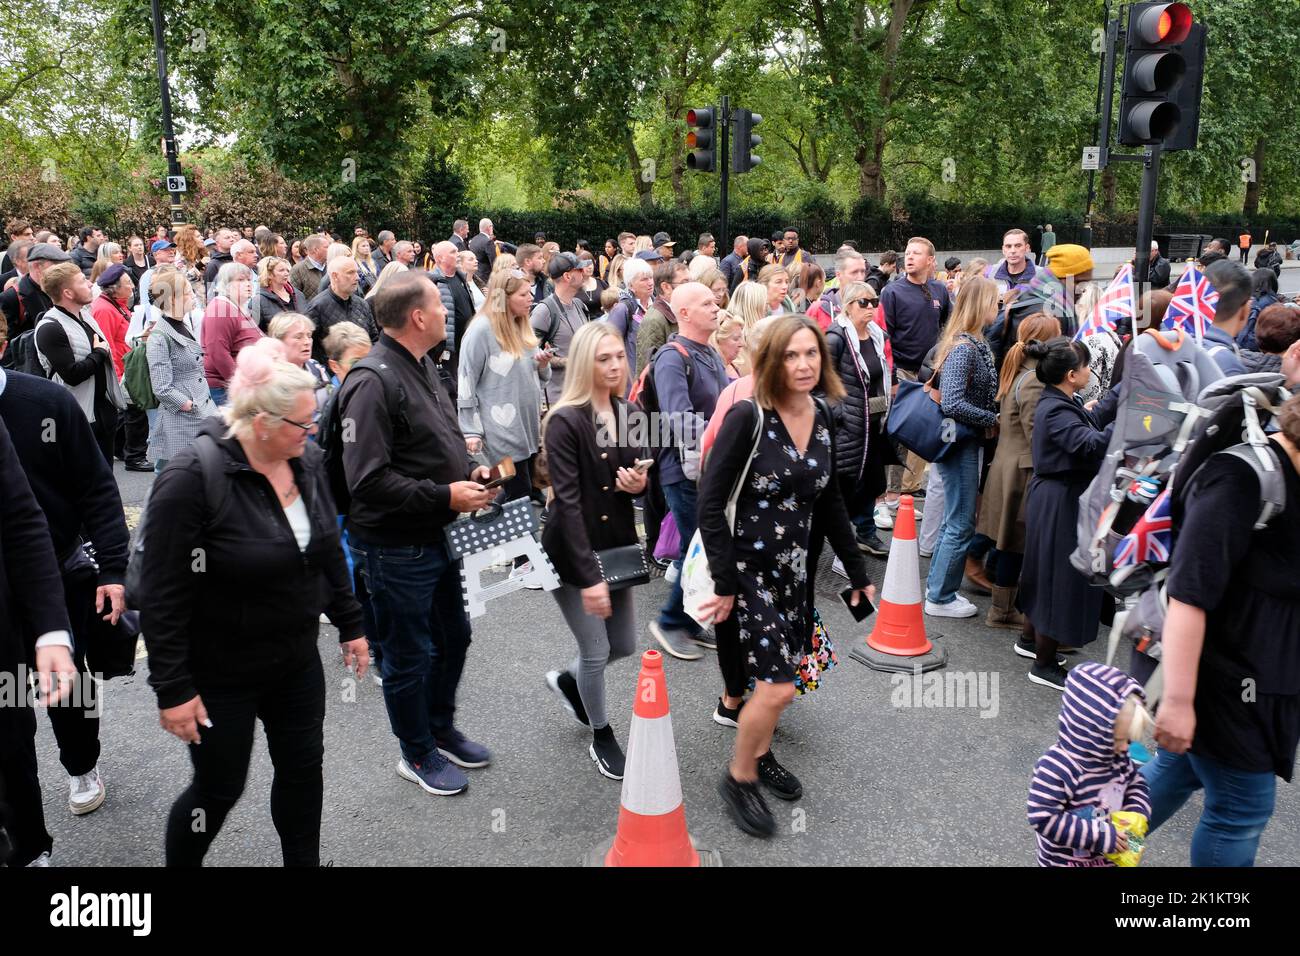 London, UK. 19th Sept 2022. Crowds walk towards Hyde Park to watch The State Funeral of Her Majesty The Queen. Credit: Matthew Chattle/Alamy Live News Stock Photo